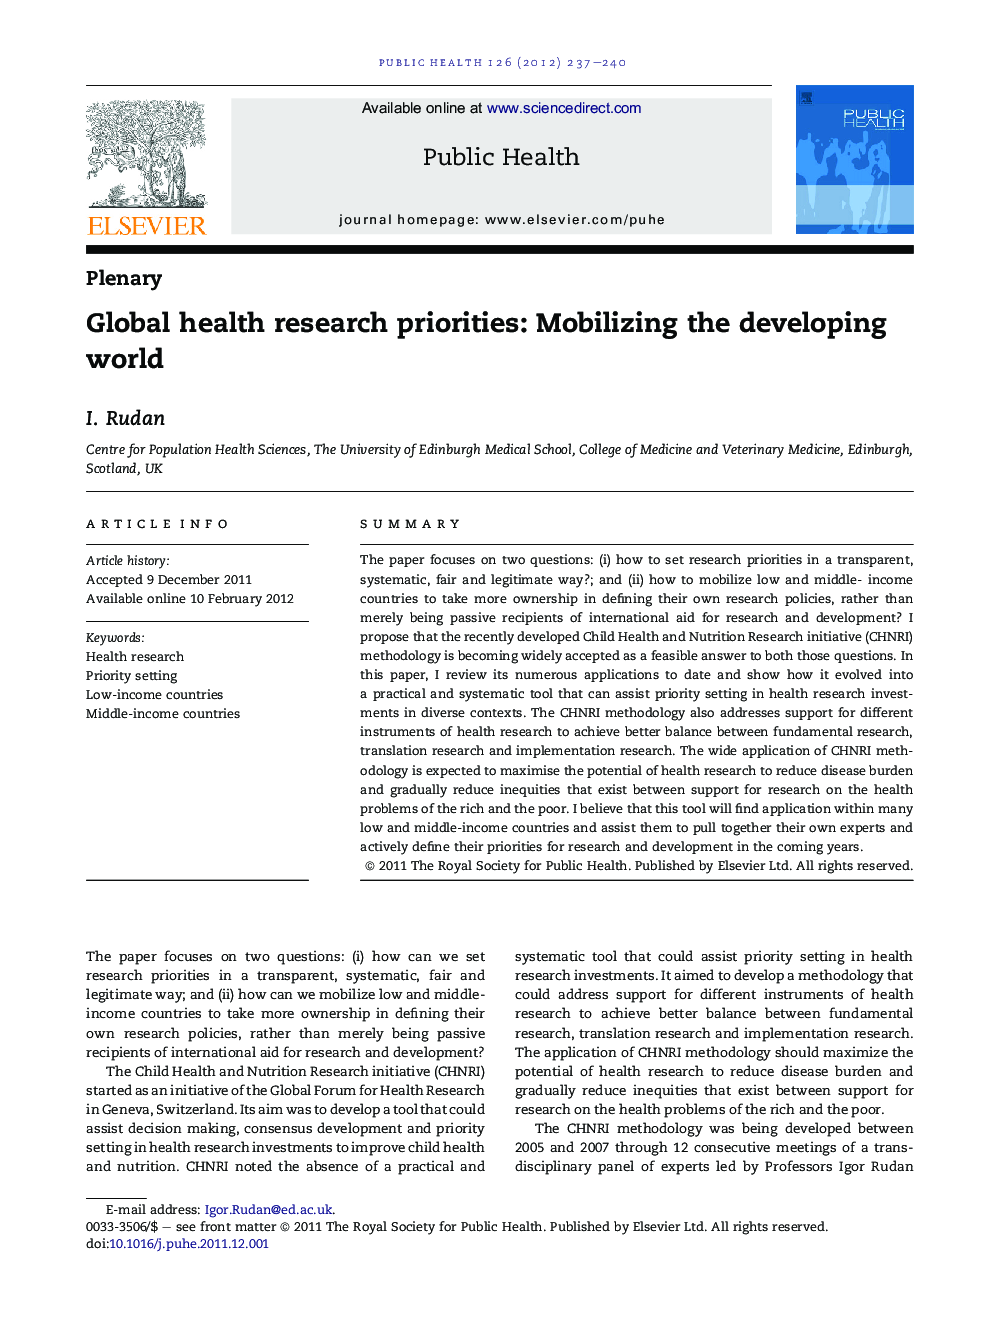 Global health research priorities: Mobilizing the developing world